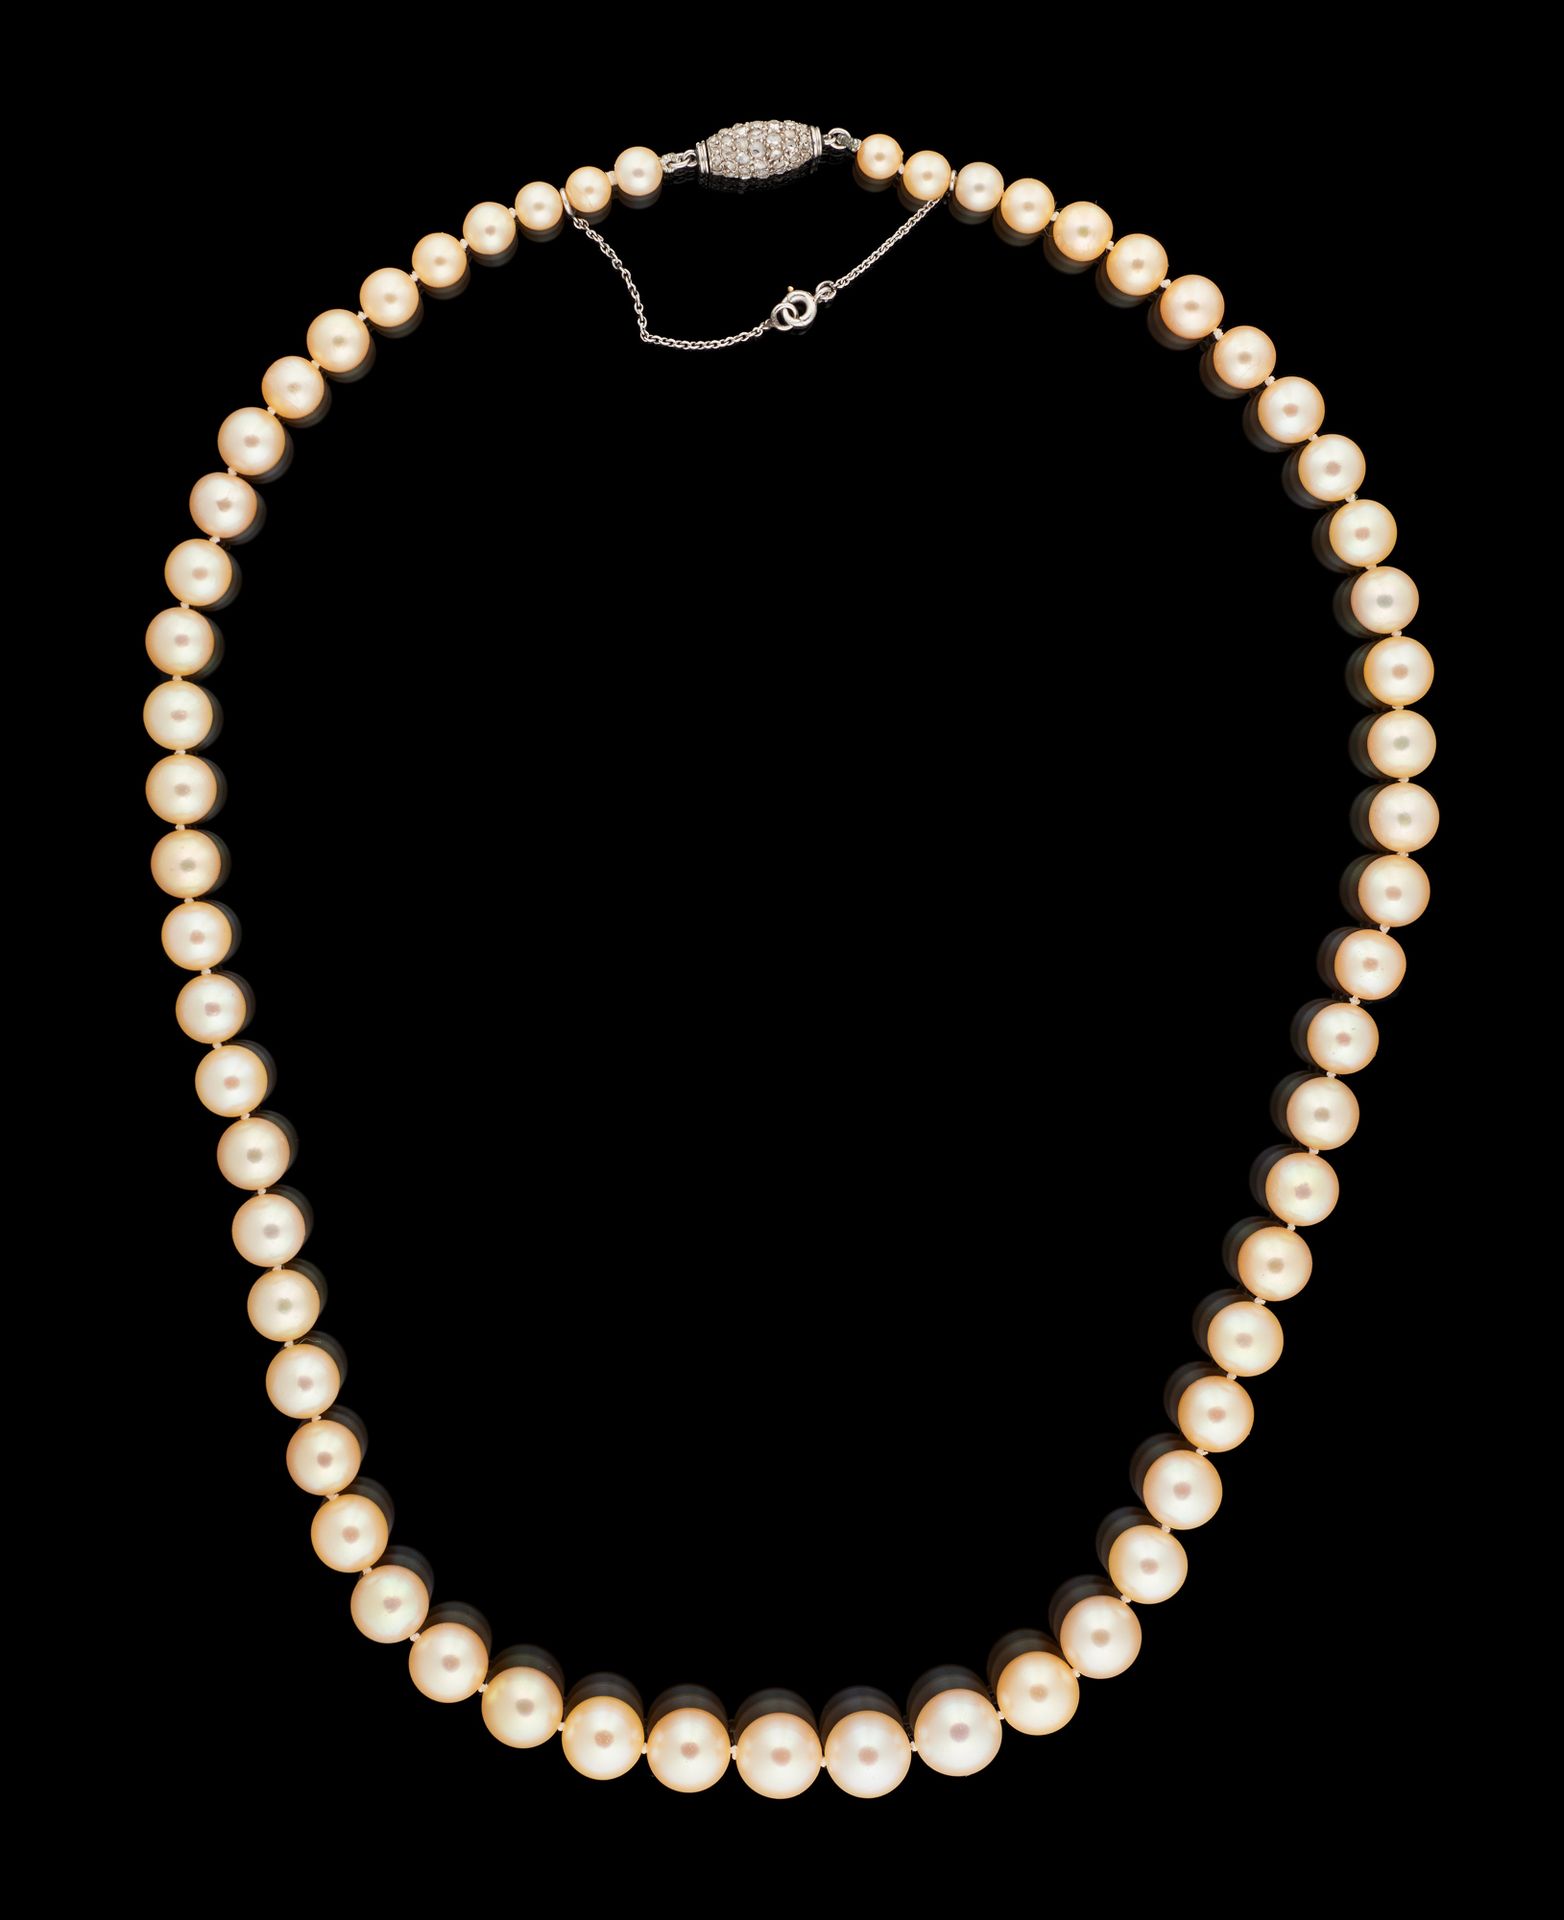 Joaillerie. Jewel: Necklace of pearls in falls (5/8,5 mm) held by a clasp in pla&hellip;